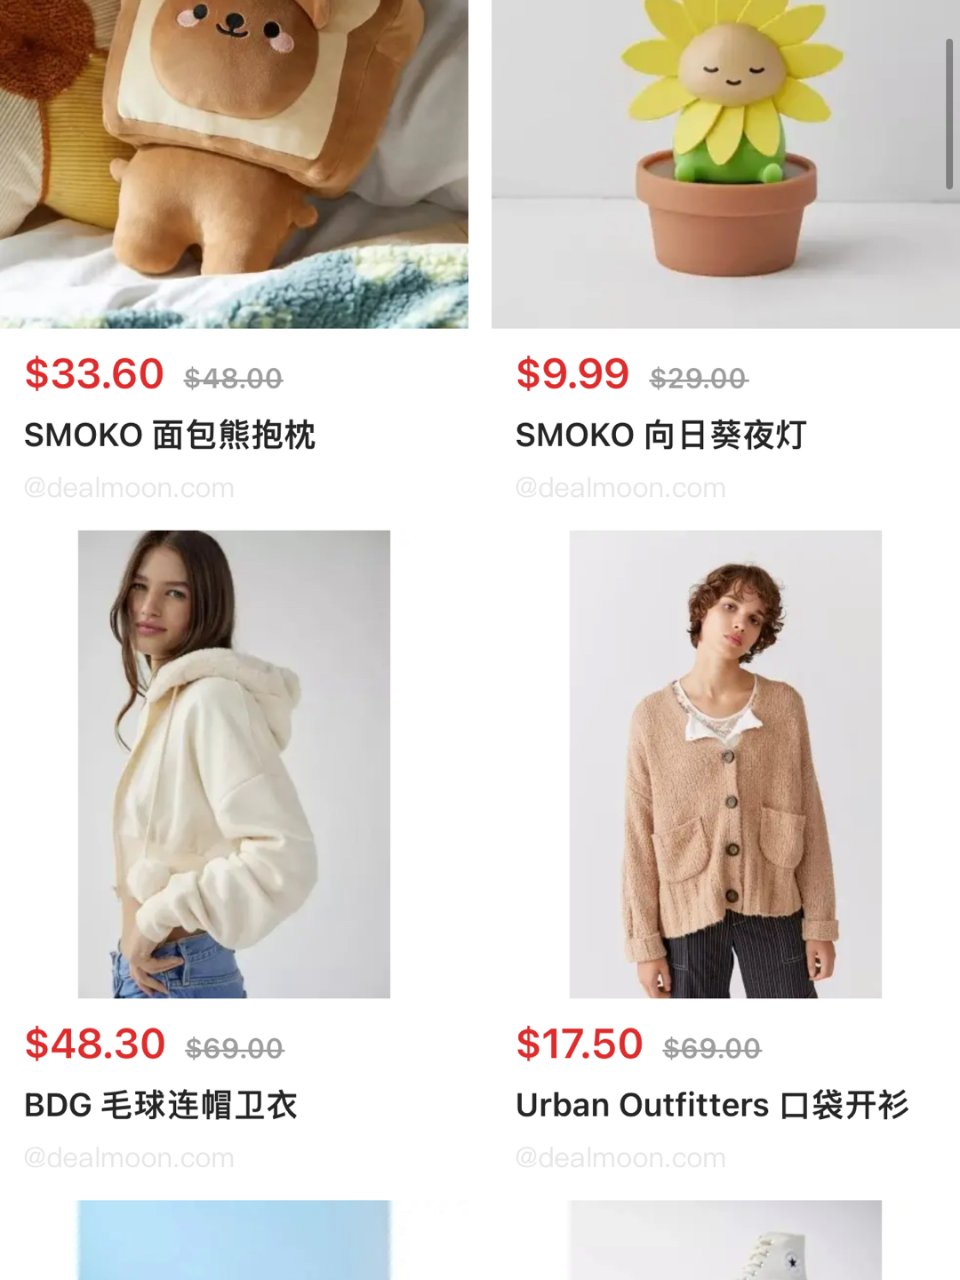 Urban outfitters 的向日...